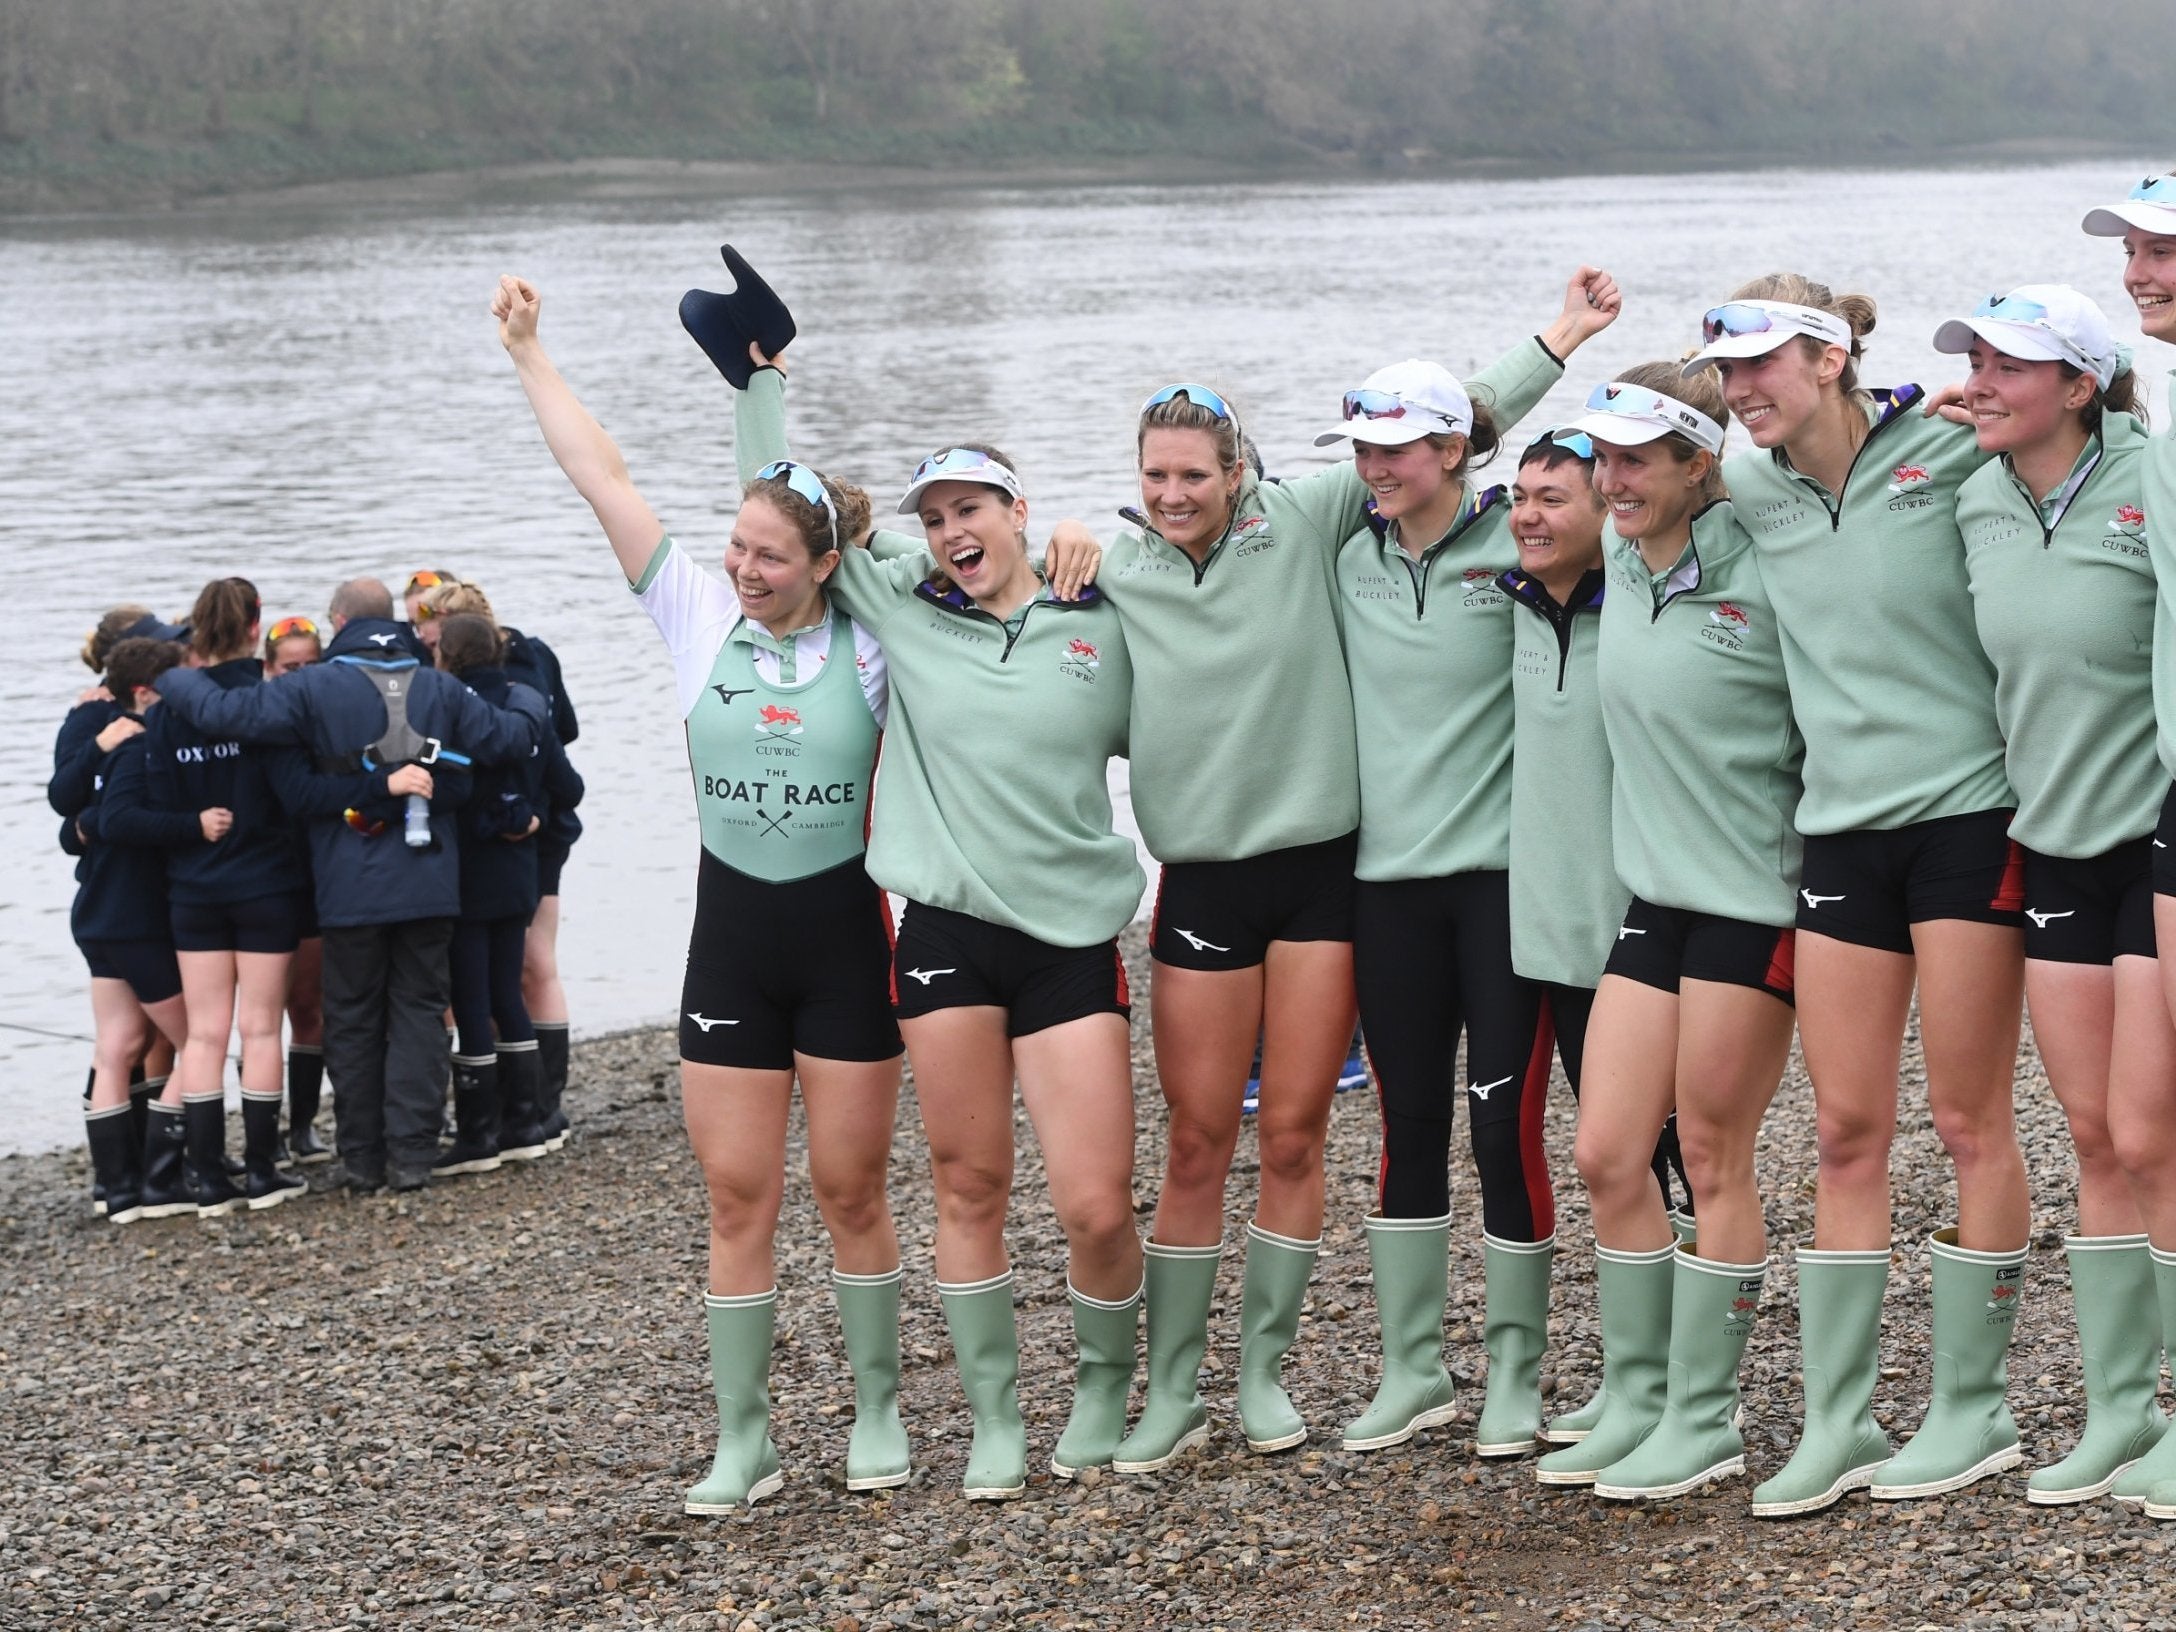 Boat Race 2019 result Cambridge beat Oxford in women's race The